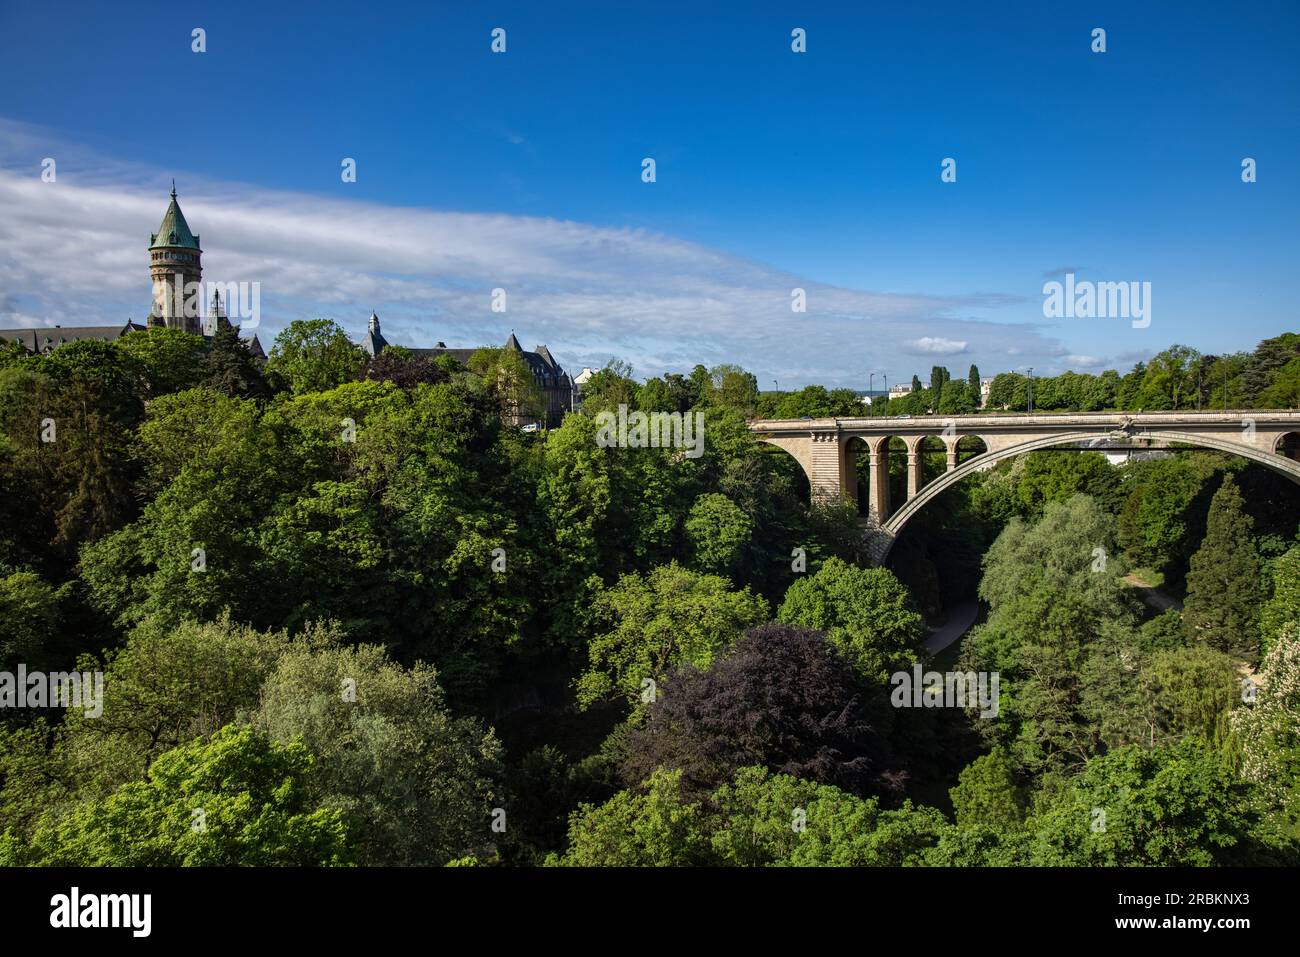 Adolphe Bridge over the Petrusse Valley, Luxembourg City, Luxembourg, Europe Stock Photo